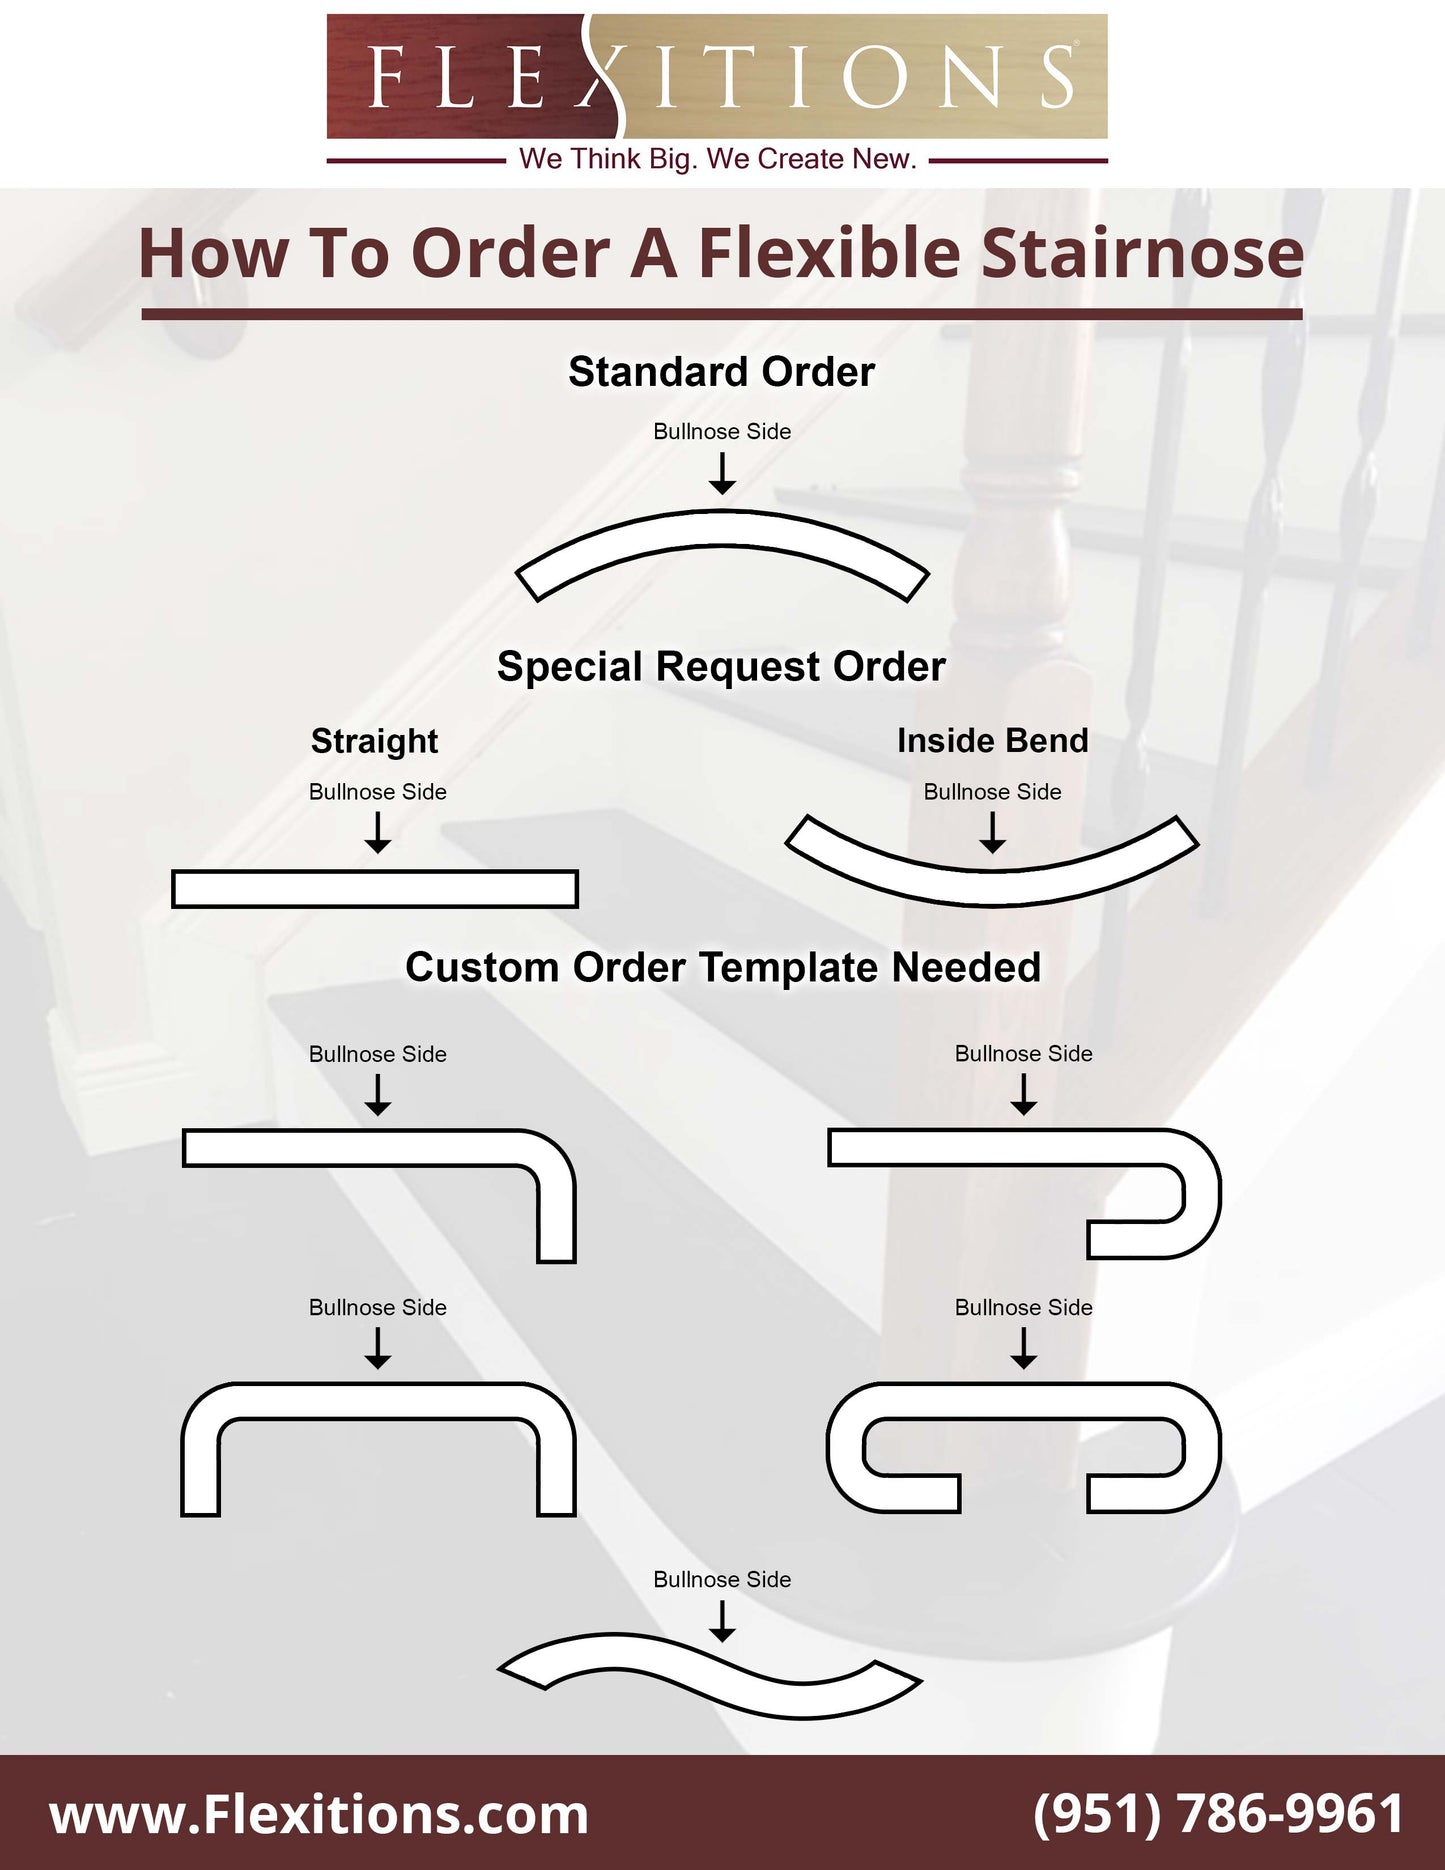 How to order a Stainable Flexible Flush Stair Nose 3/4"